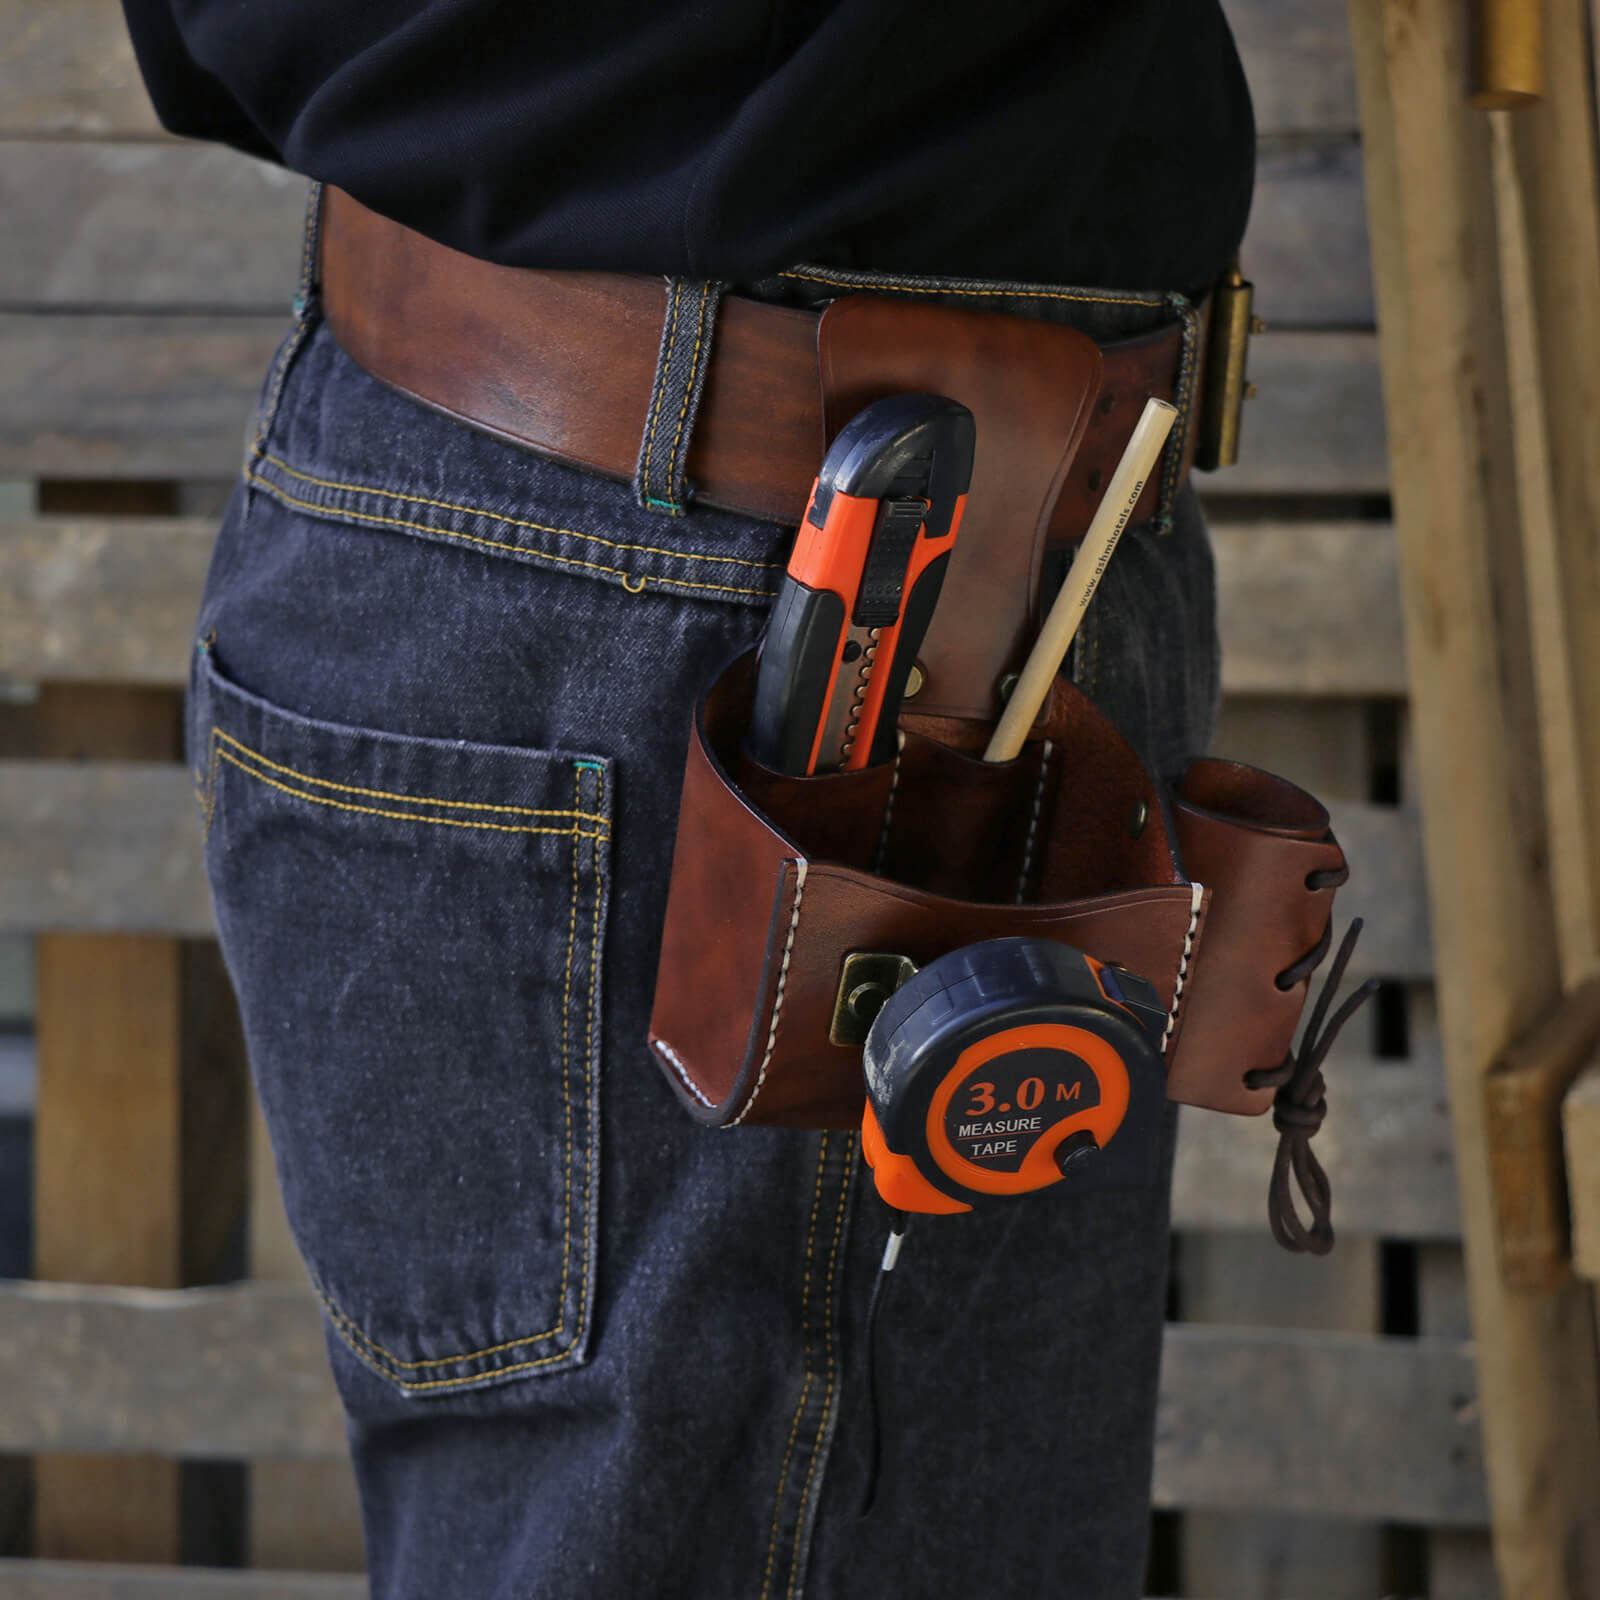  TOURBON Tool Belt Holster Screw Work Pouch with Tape Measure  Clip : Tools & Home Improvement